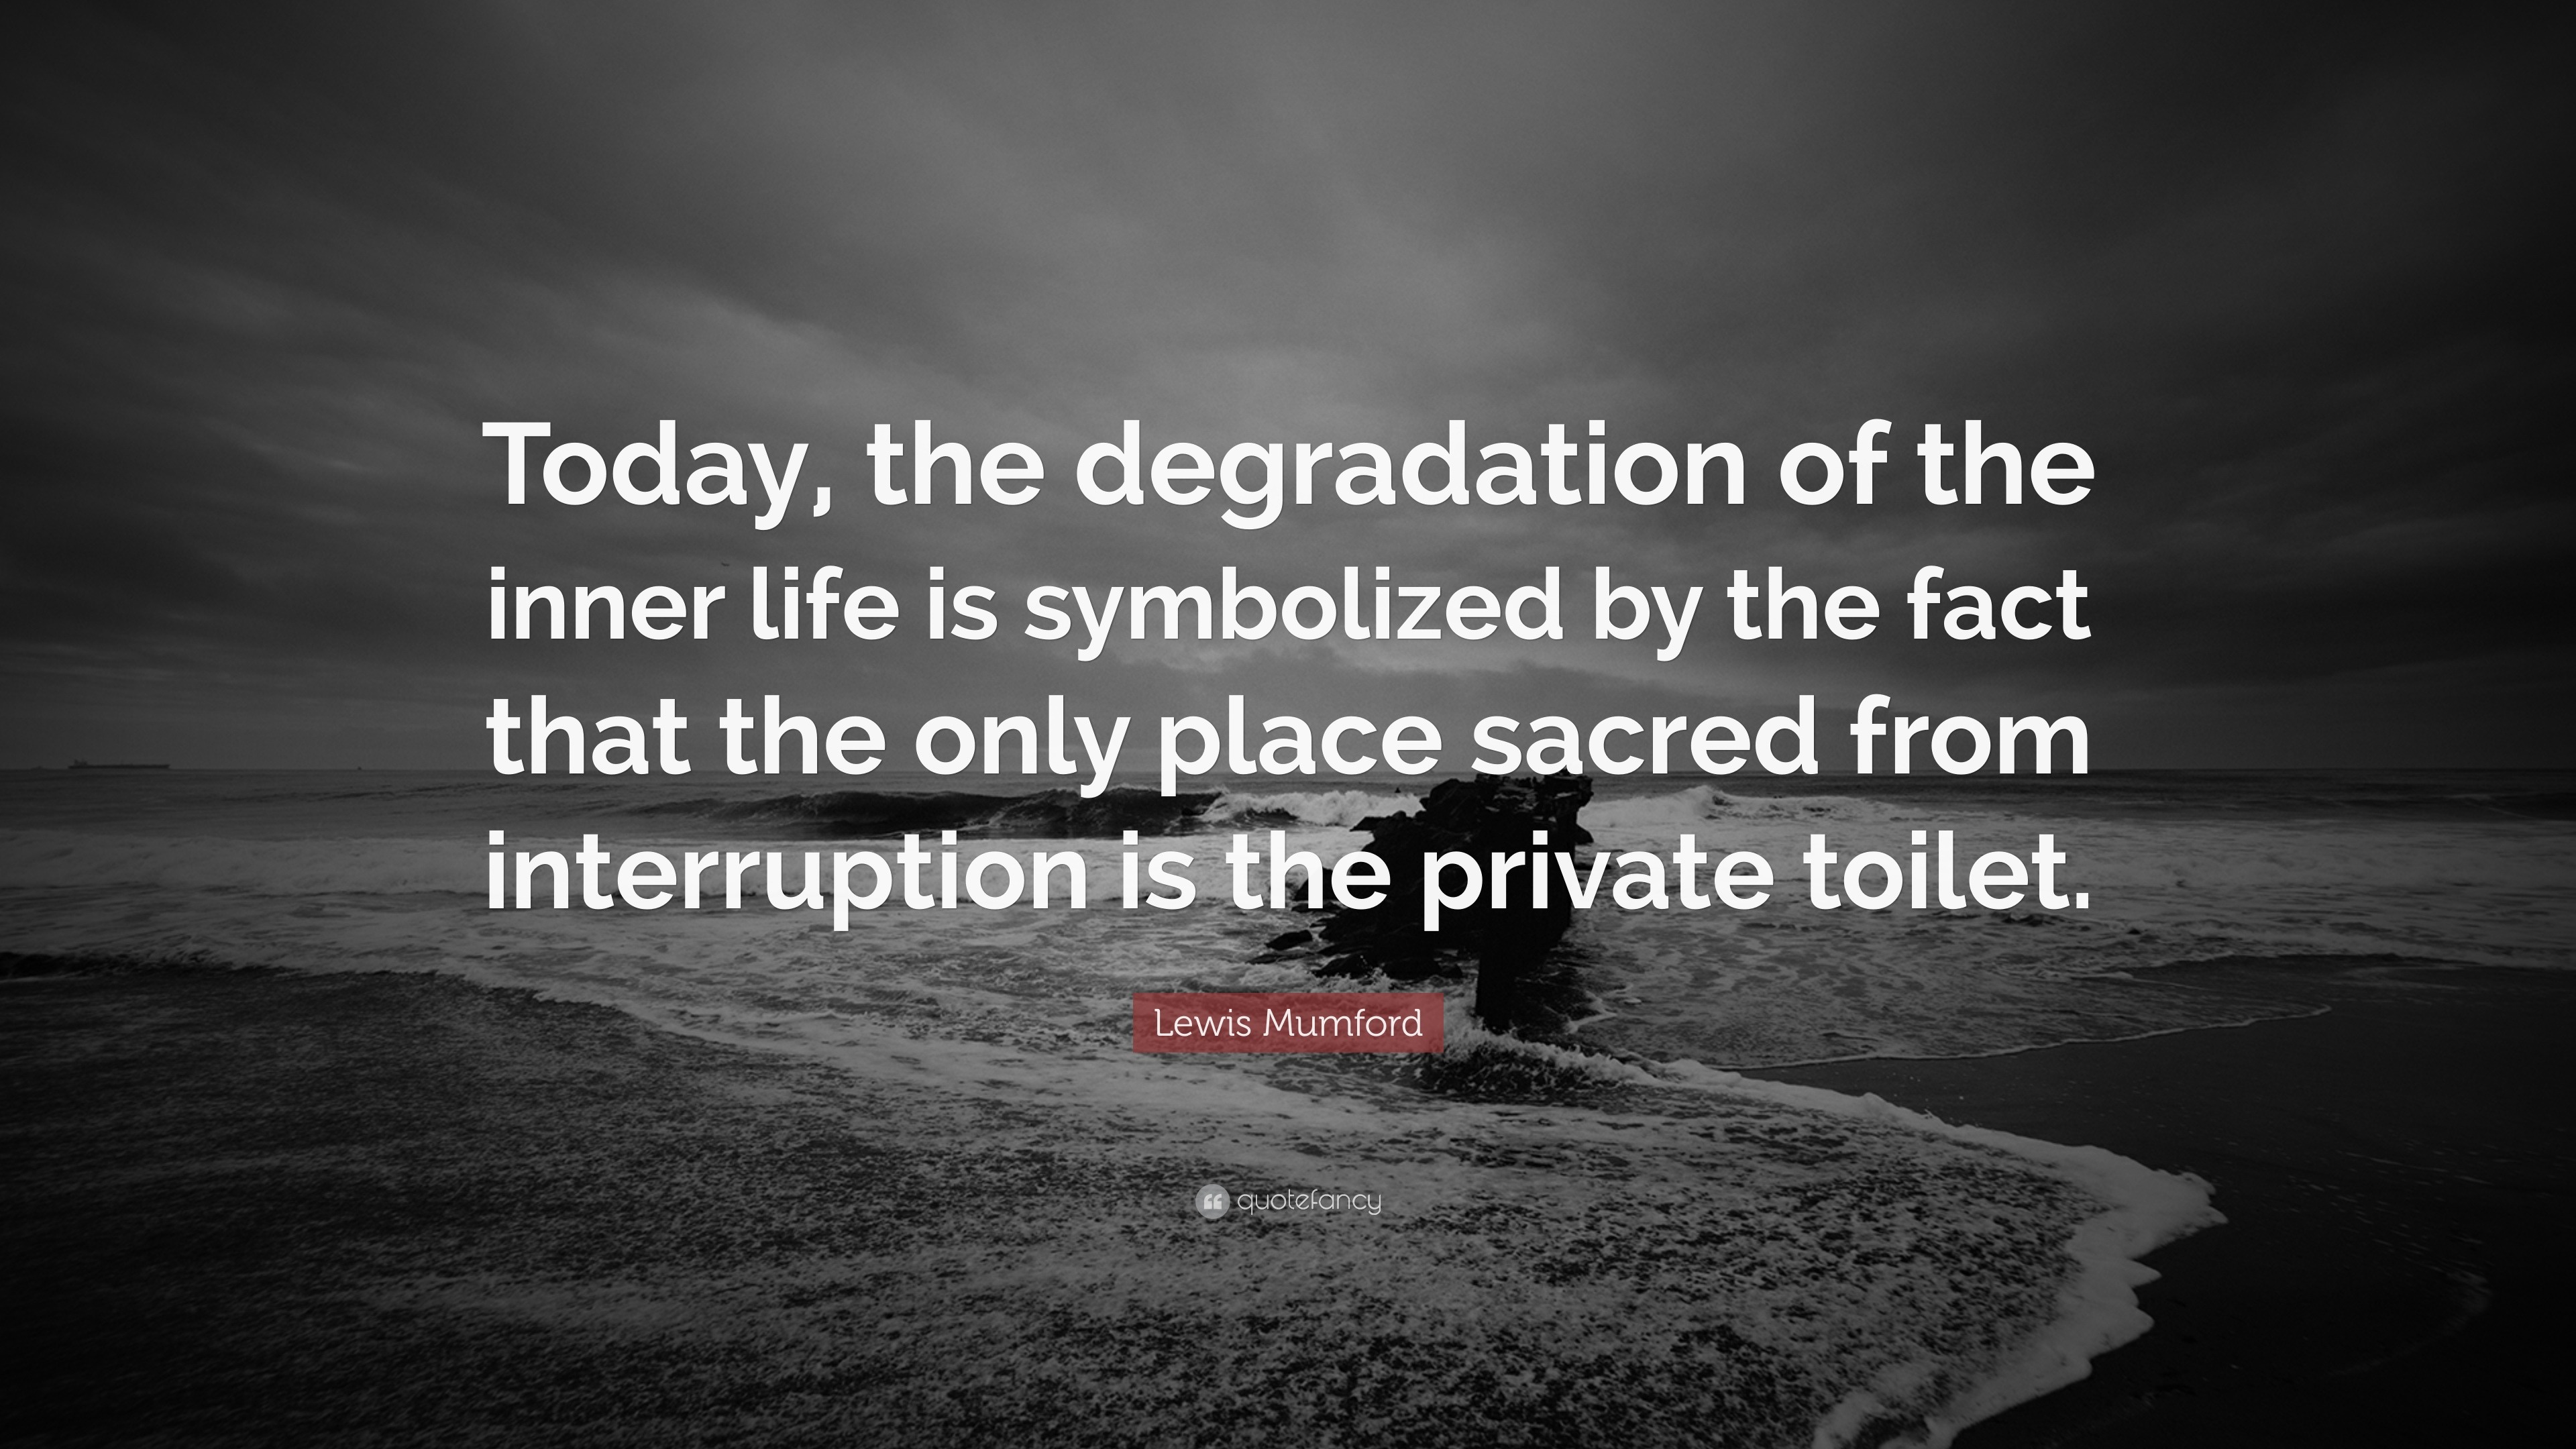 Lewis Mumford Quote: "Today, the degradation of the inner life is symbolized by the fact that ...